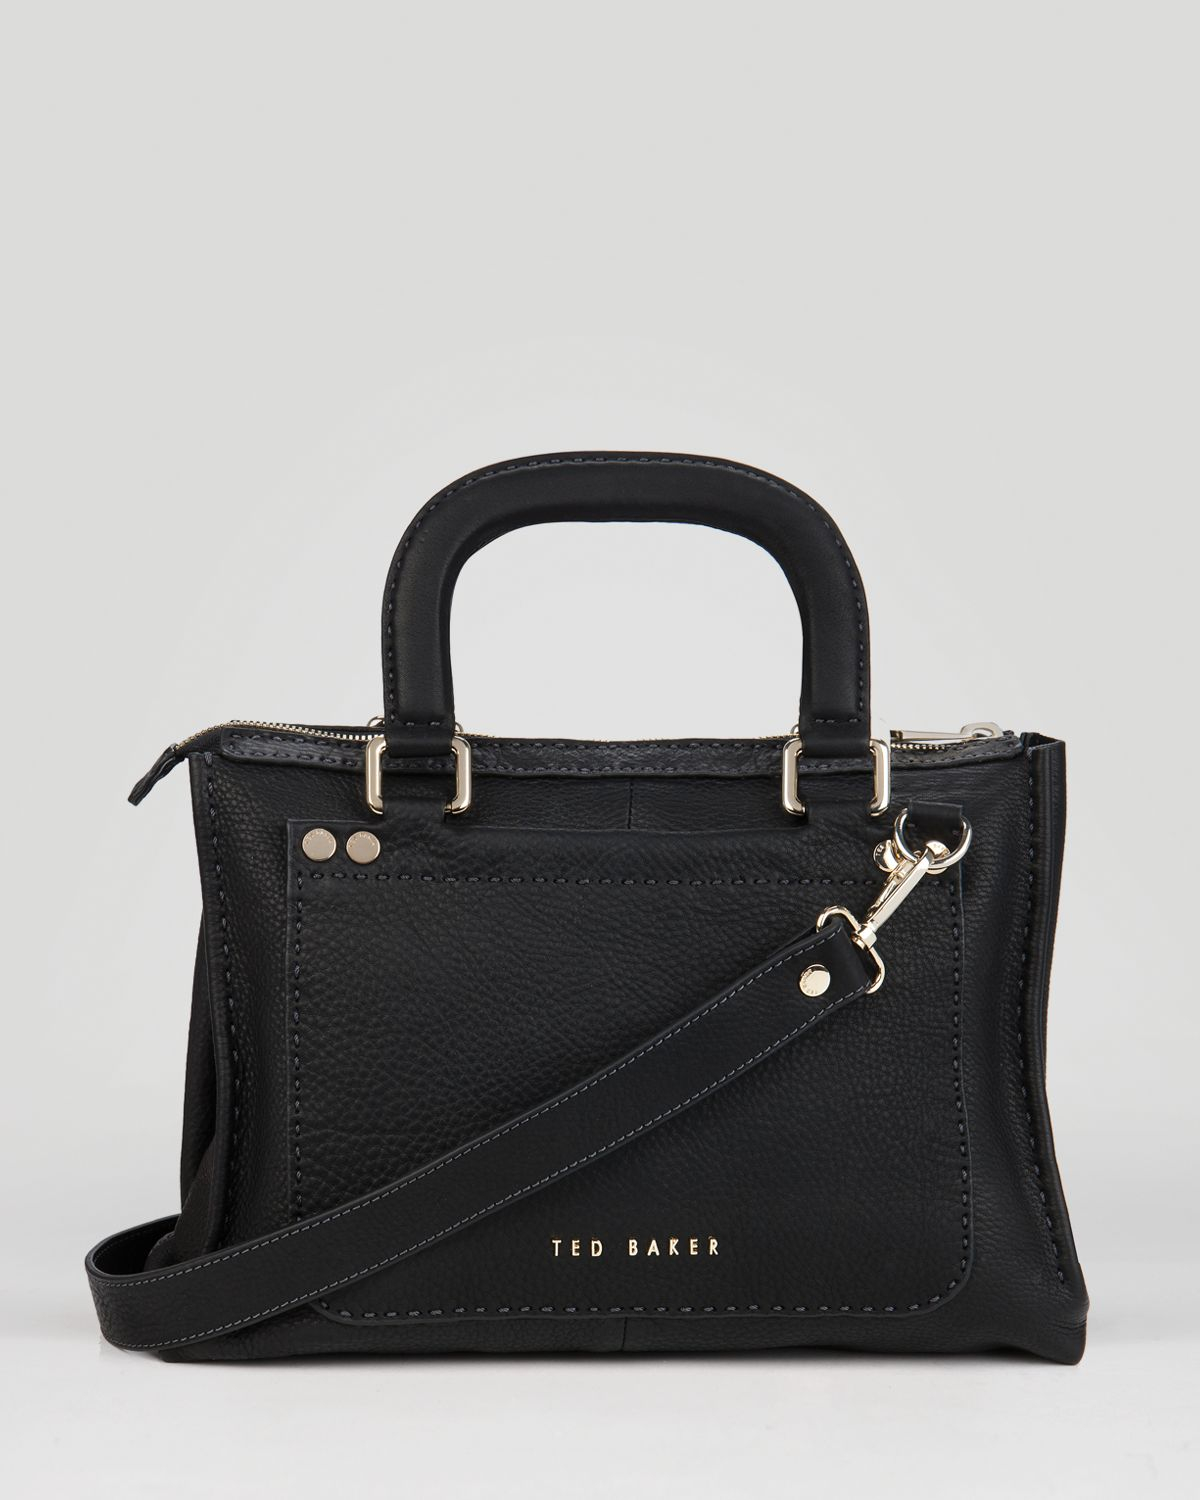 Lyst - Ted baker Satchel Hickory Stab Stitch in Black